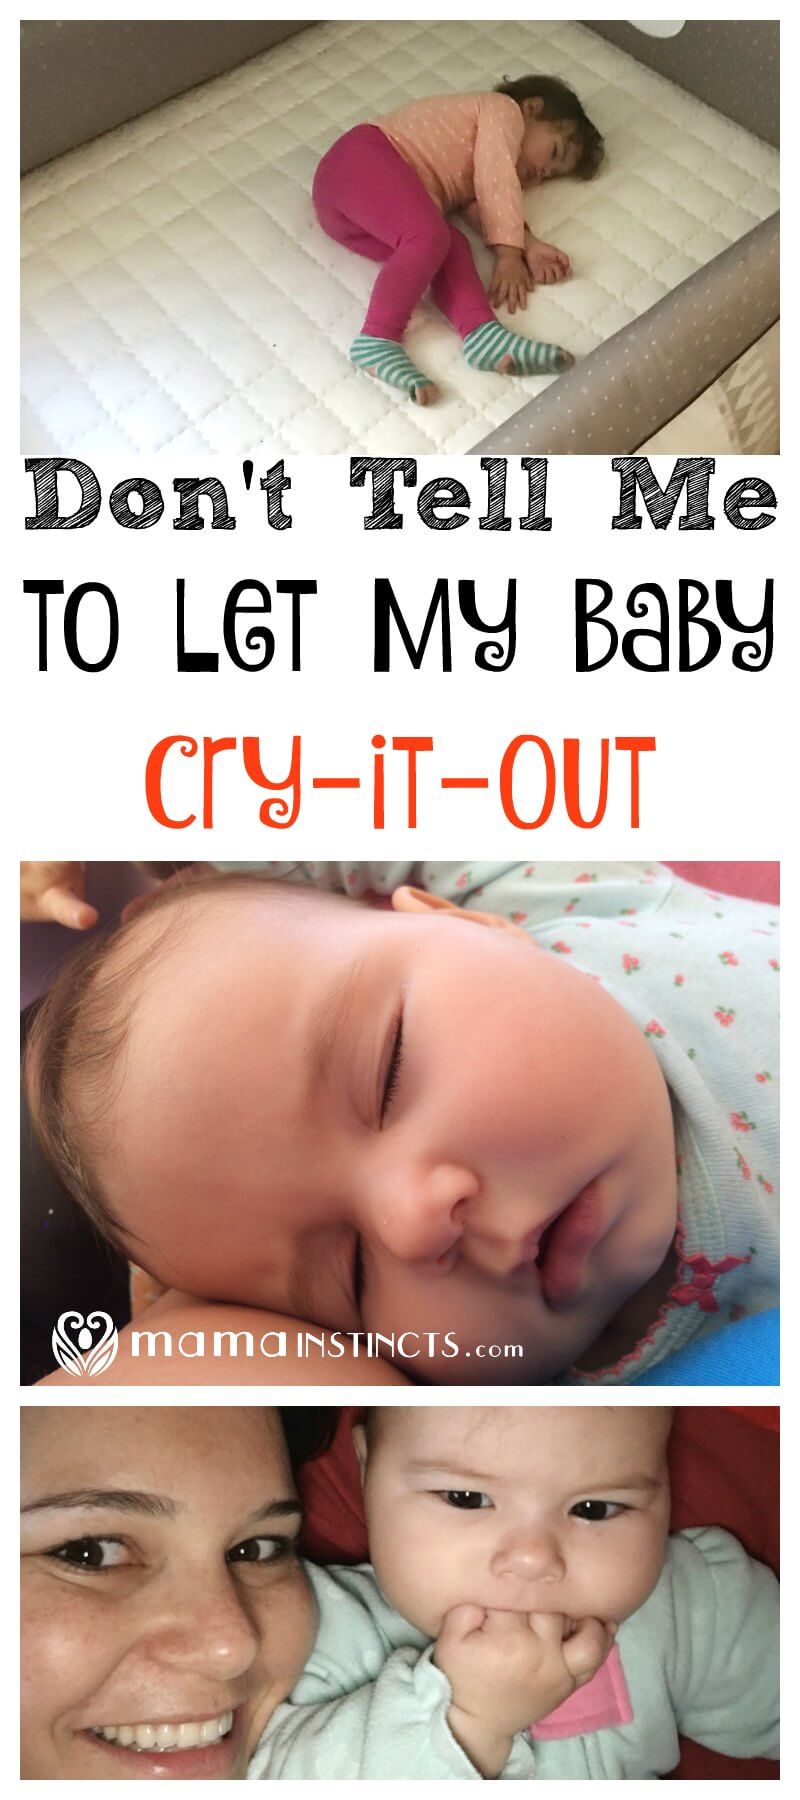 Stop listening to what other people are saying and start listening to your instincts. If sleep training your baby doesn't feel right, stop doing it. Just because someone said you baby your should cry it out, it doesn't mean that's right. Here's what I've always wanted to say when other people recommend this practice.